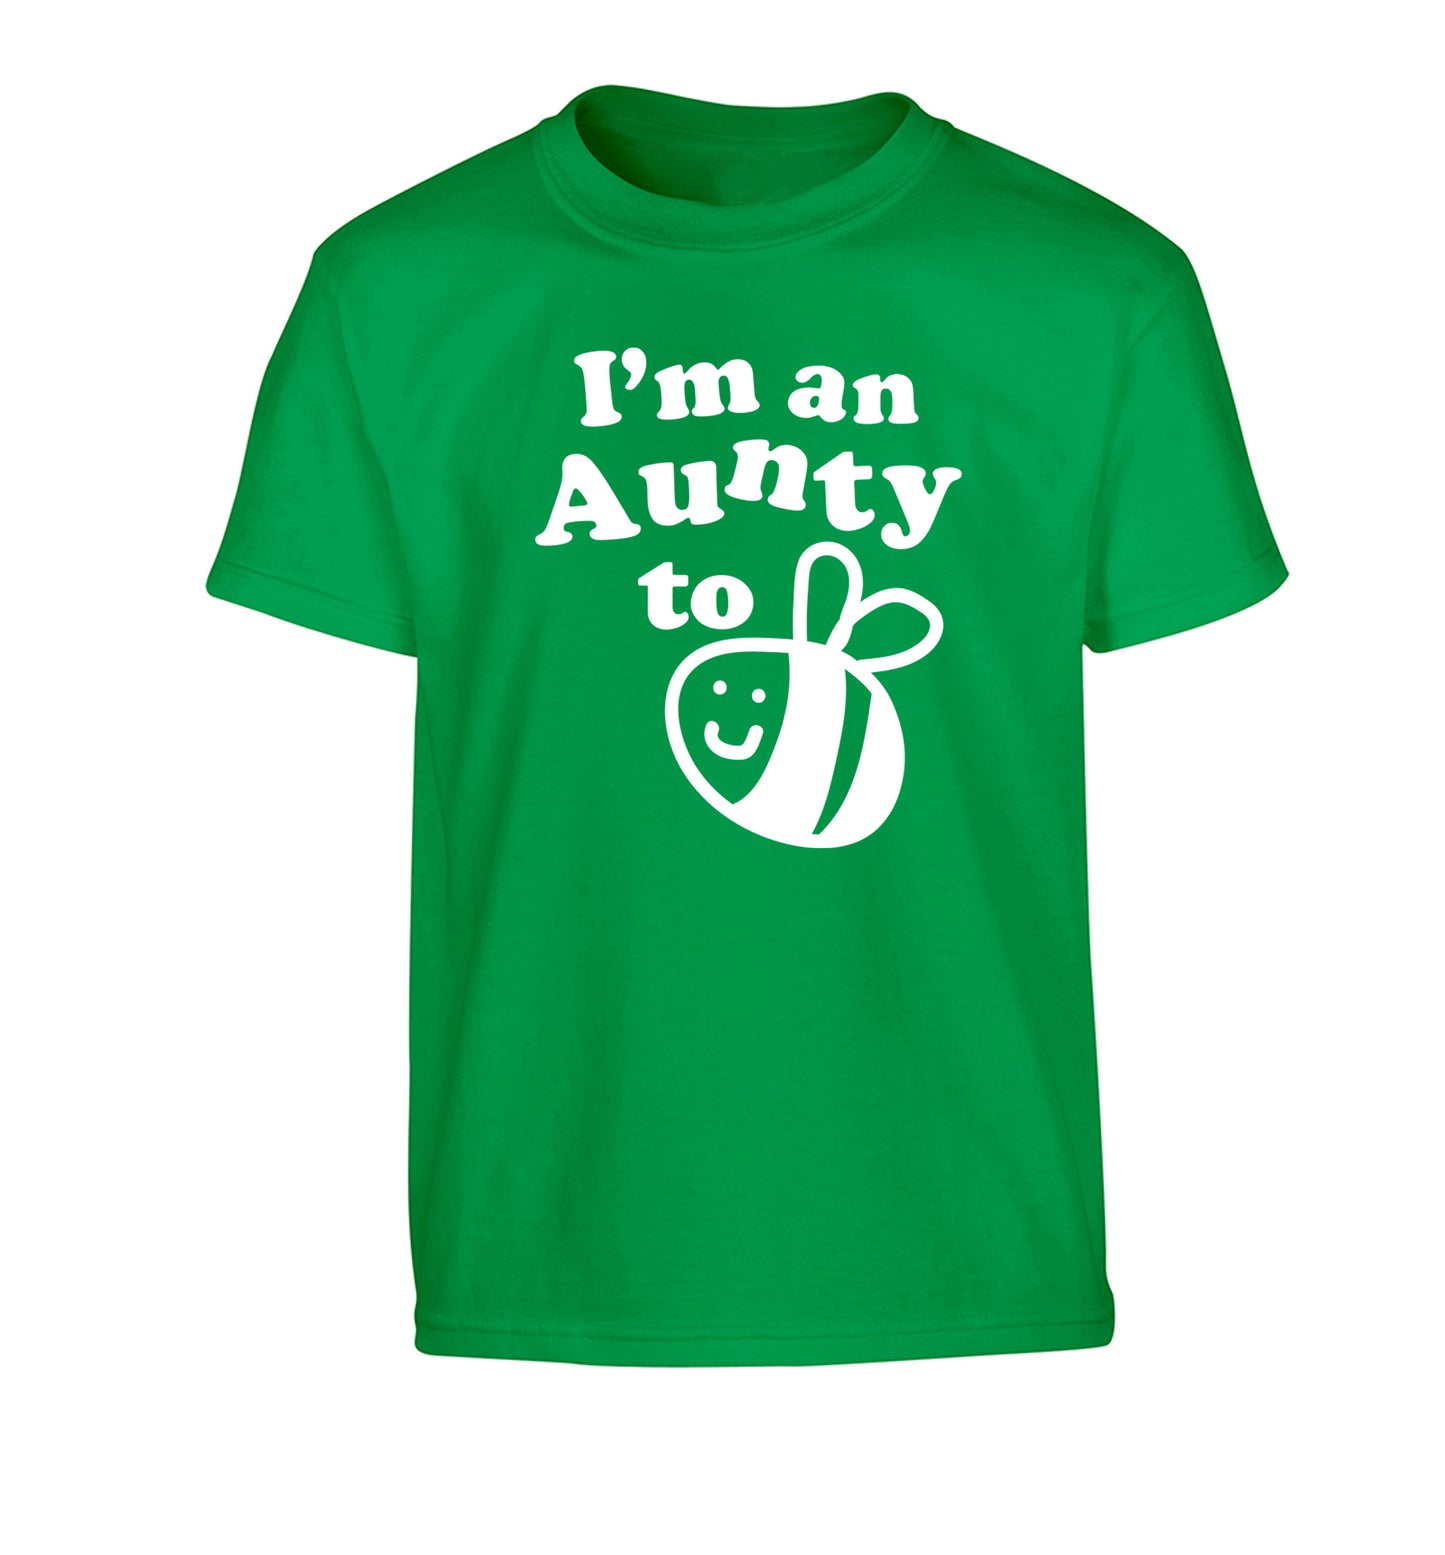 I'm an aunty to be Children's green Tshirt 12-14 Years